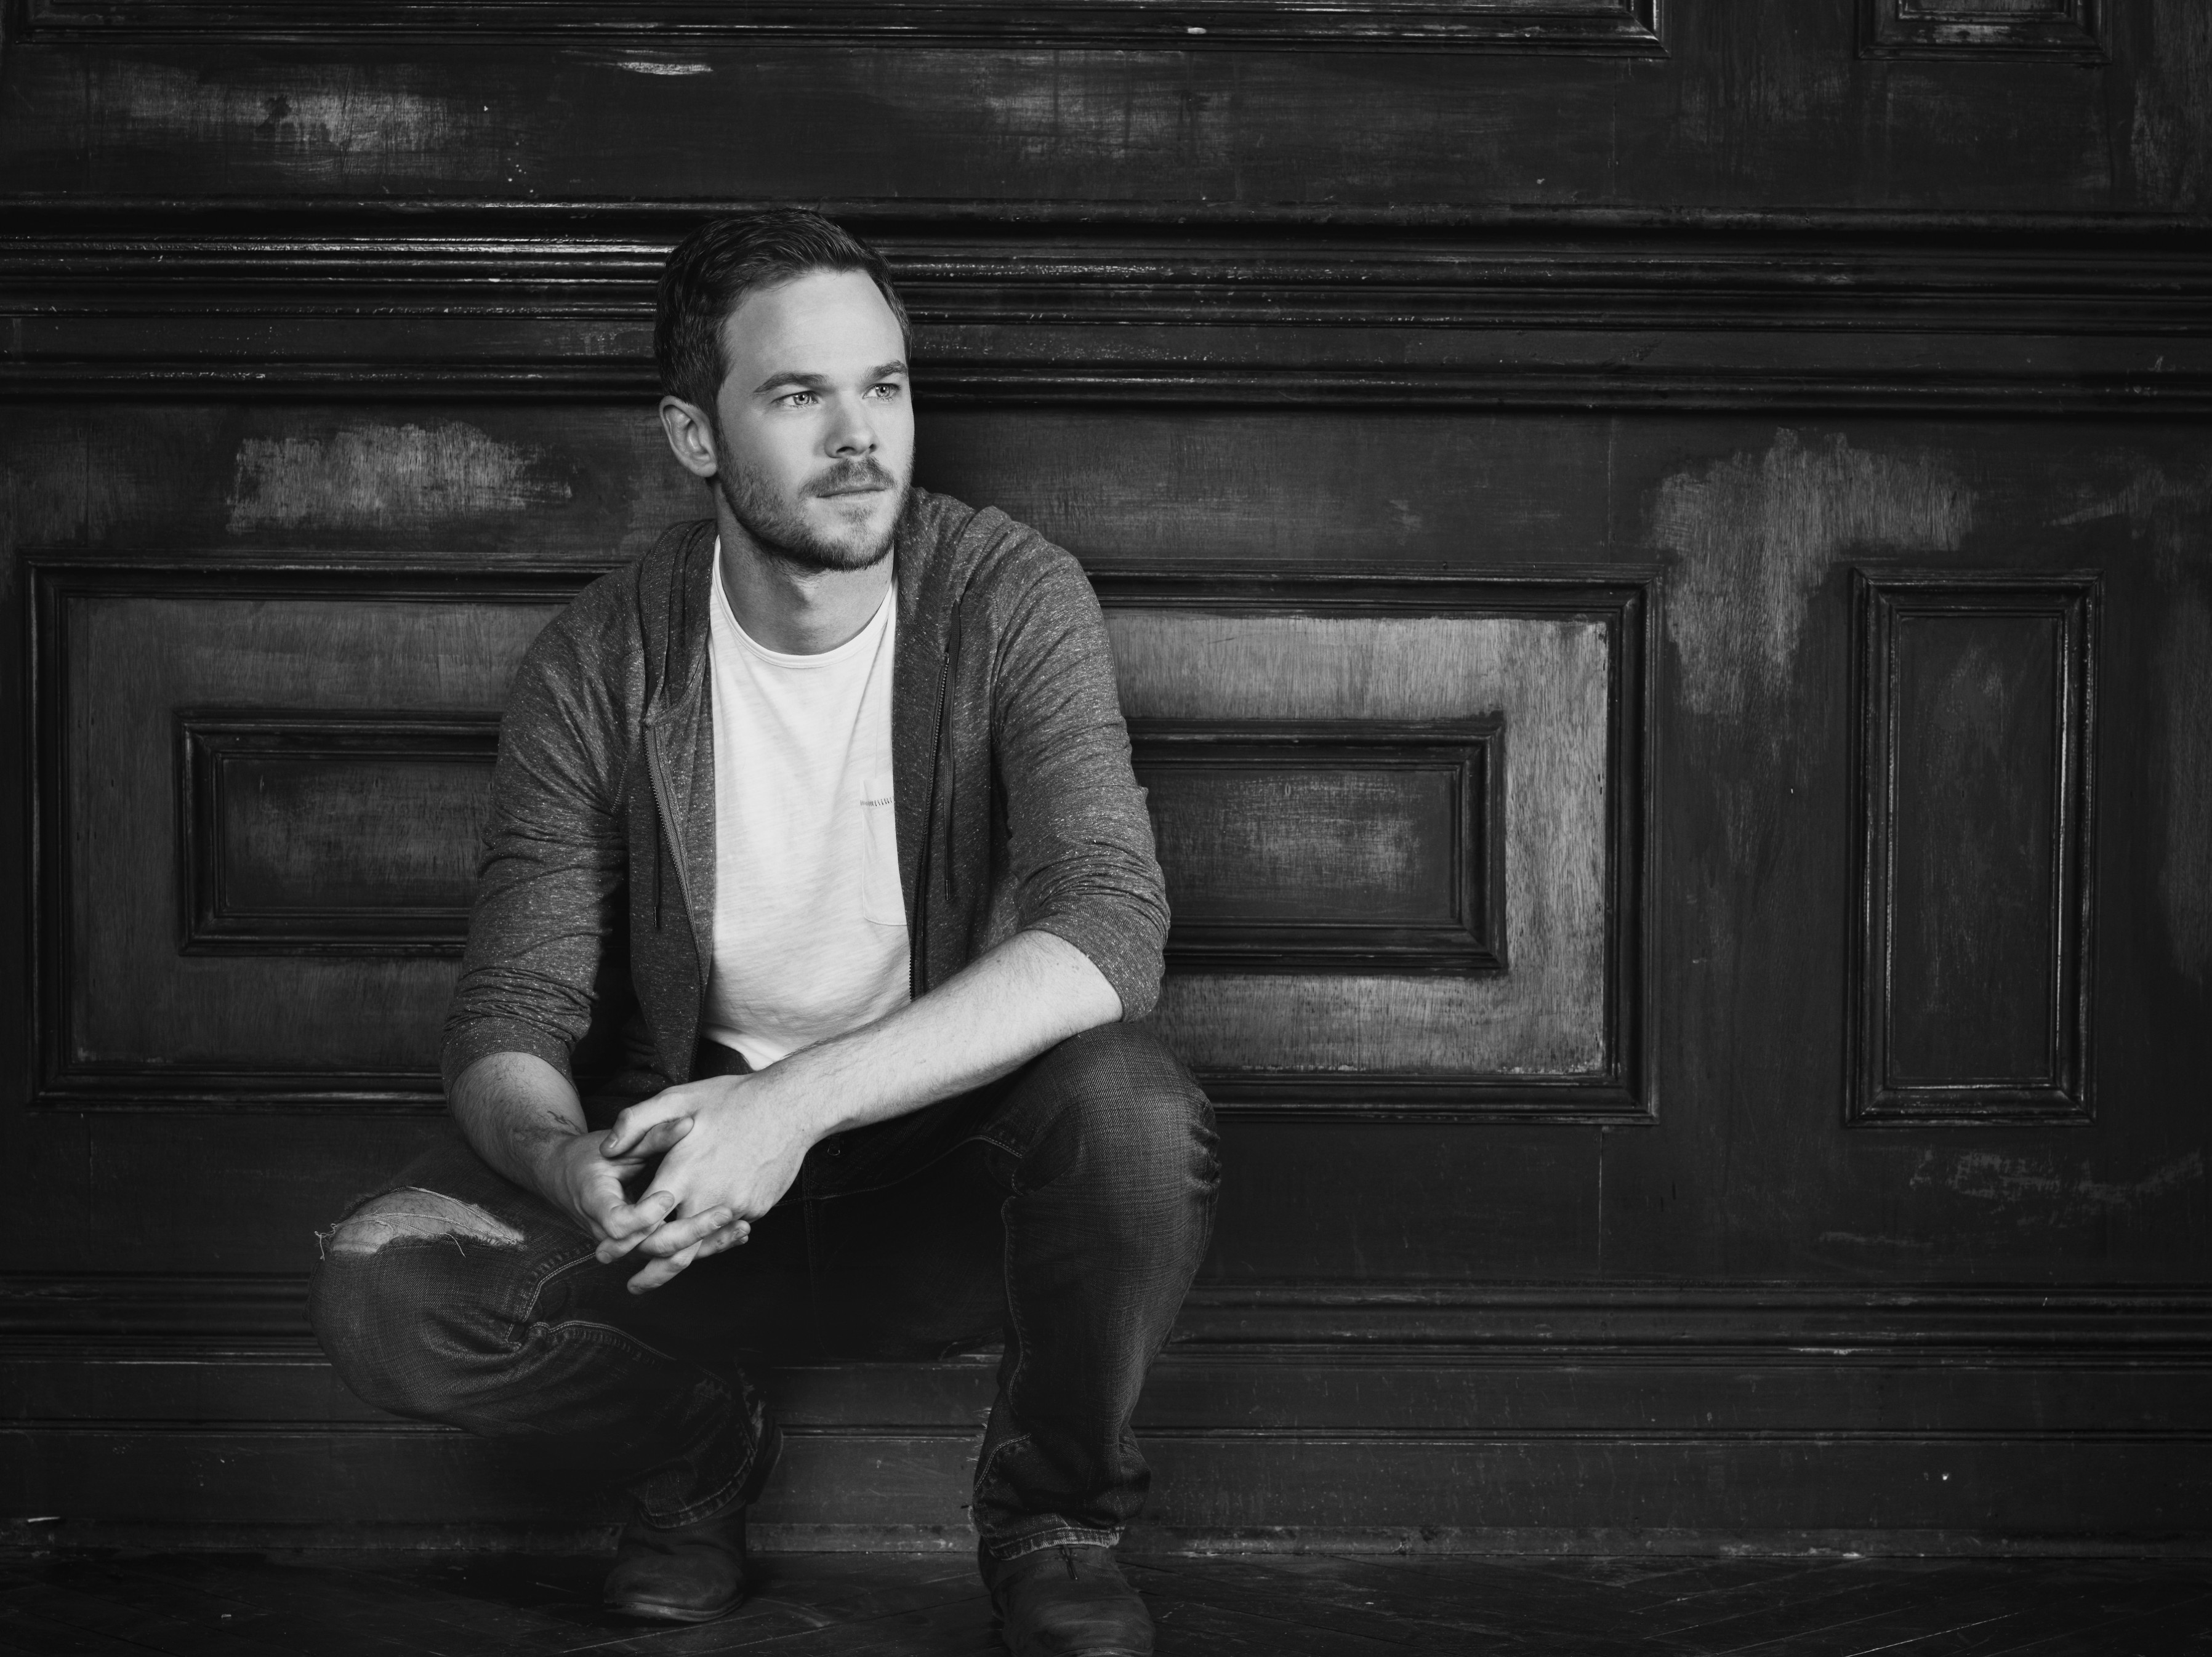 Shawn Ashmore photo 37 of 39 pics, wallpaper - photo #705511 - ThePlace2